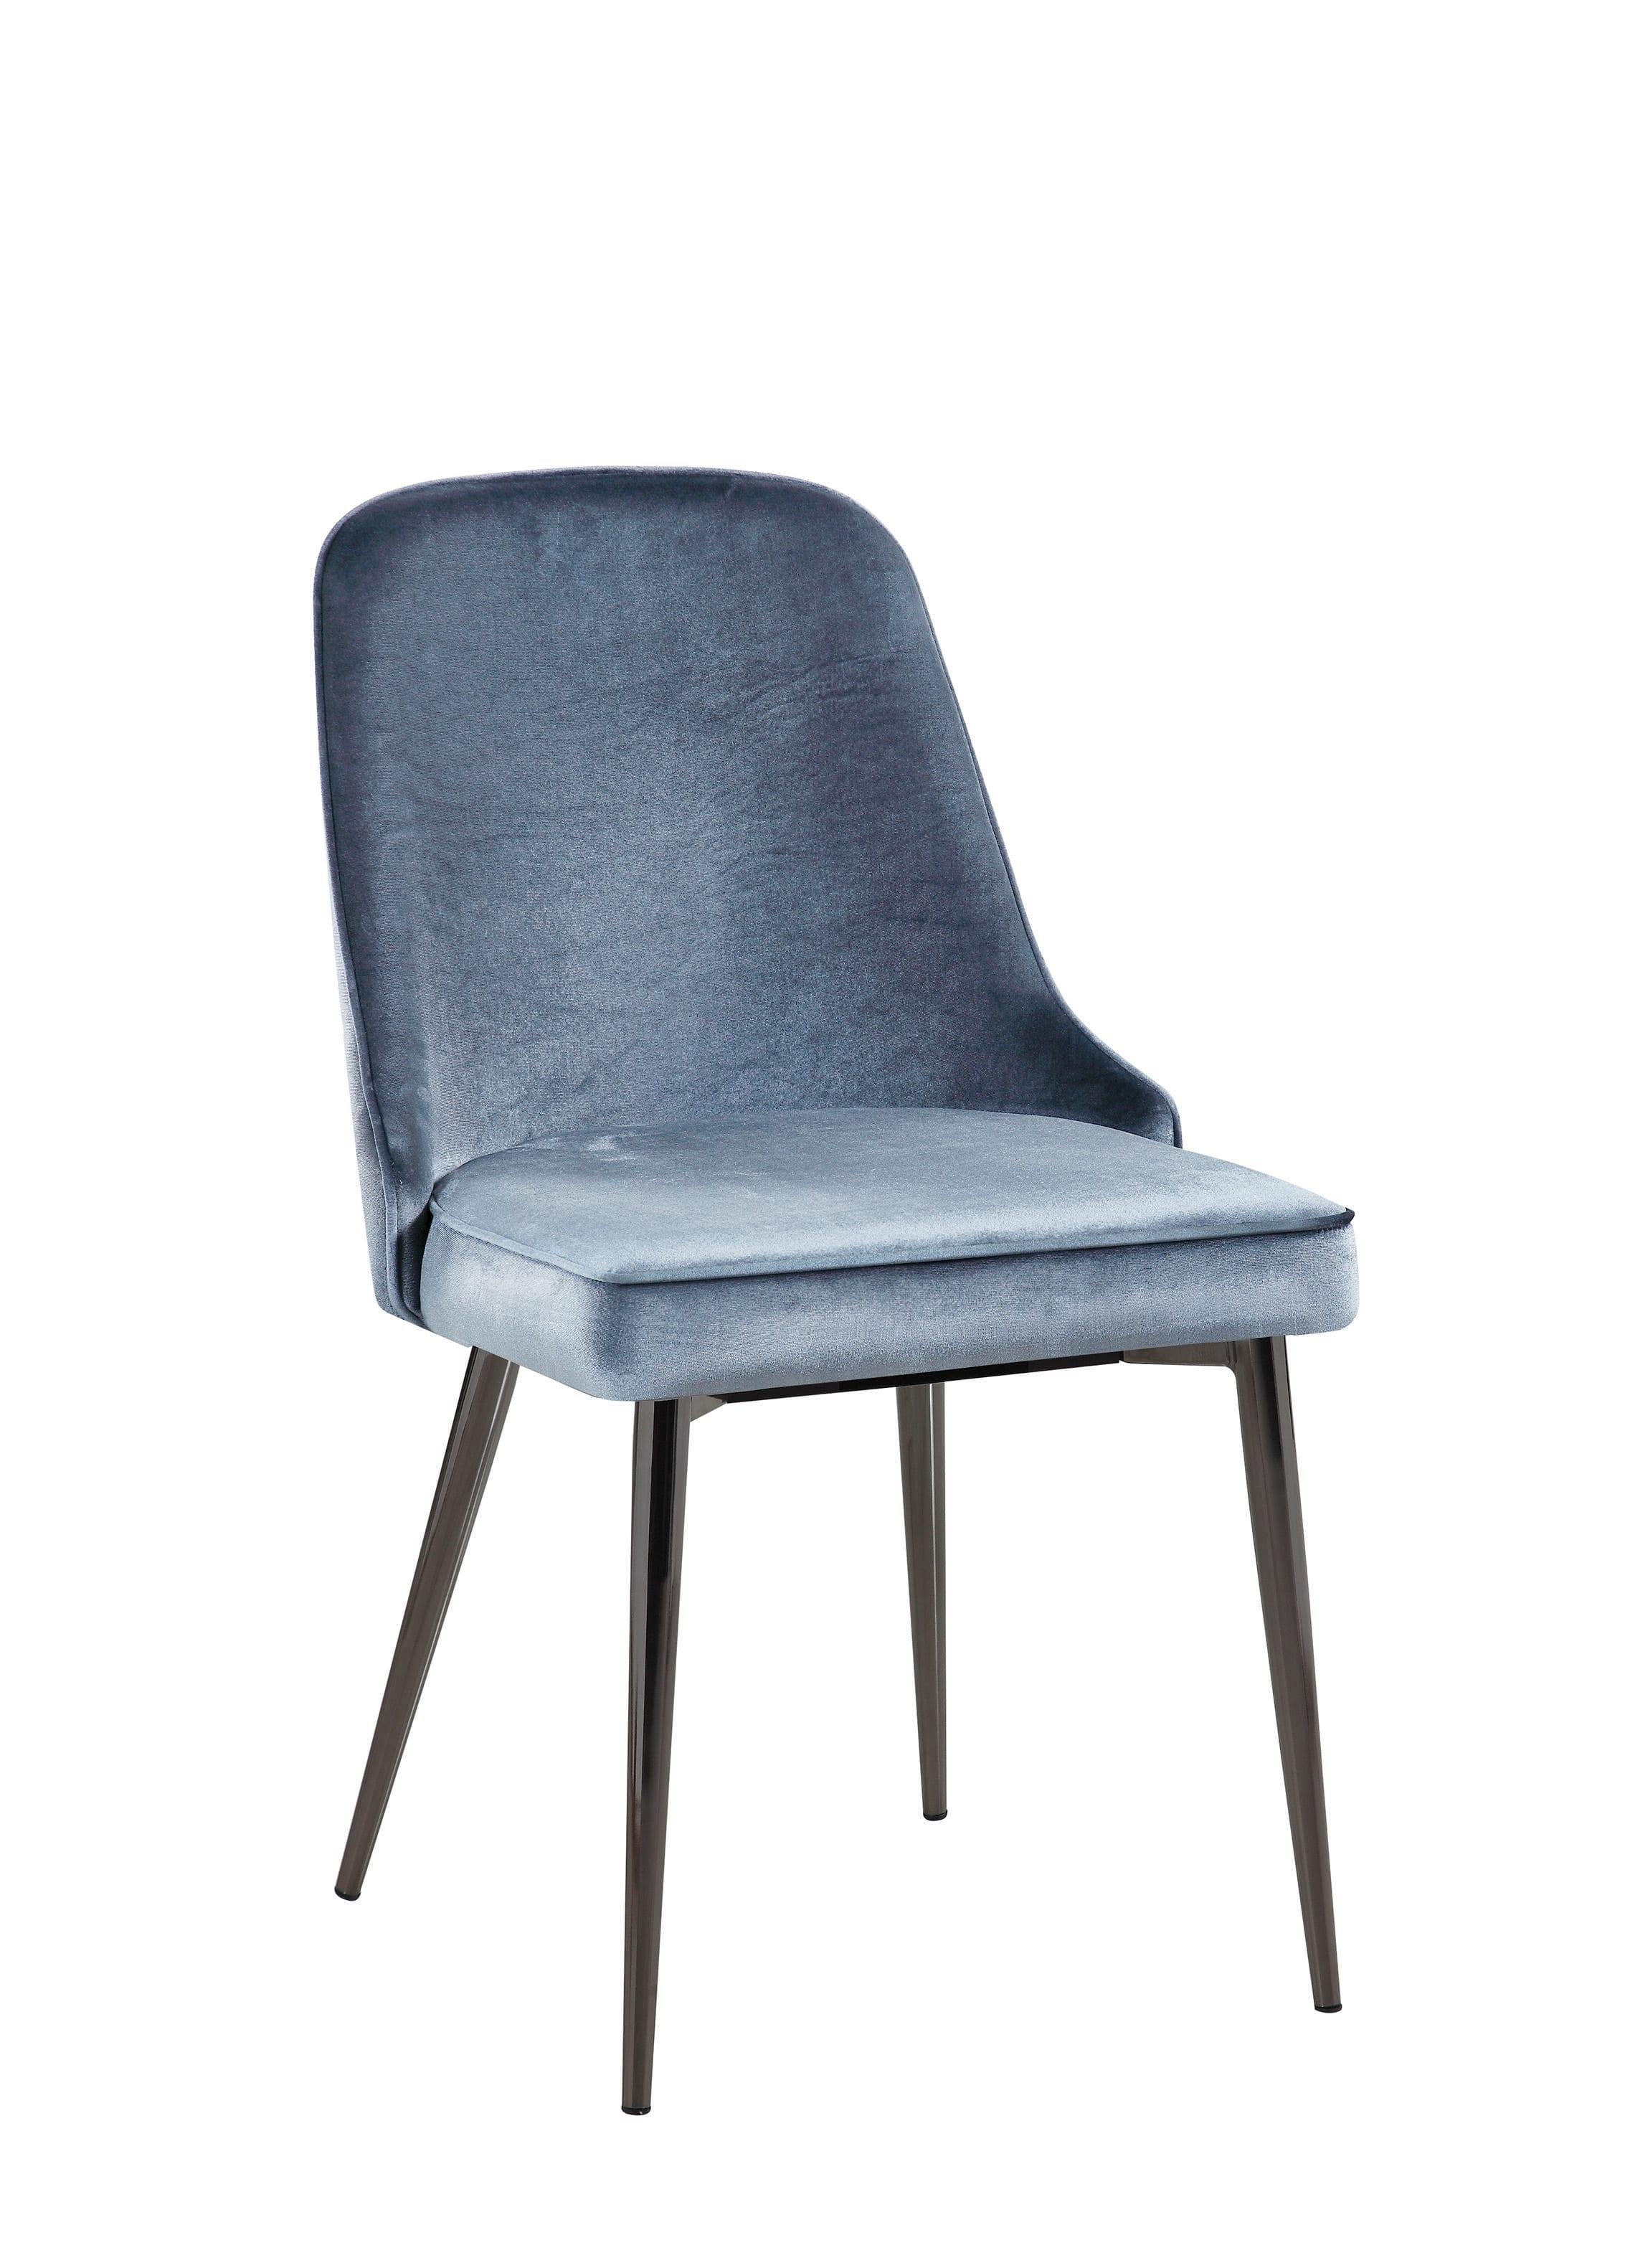 Modern Dining Chair Byum 107954 in Blue Fabric